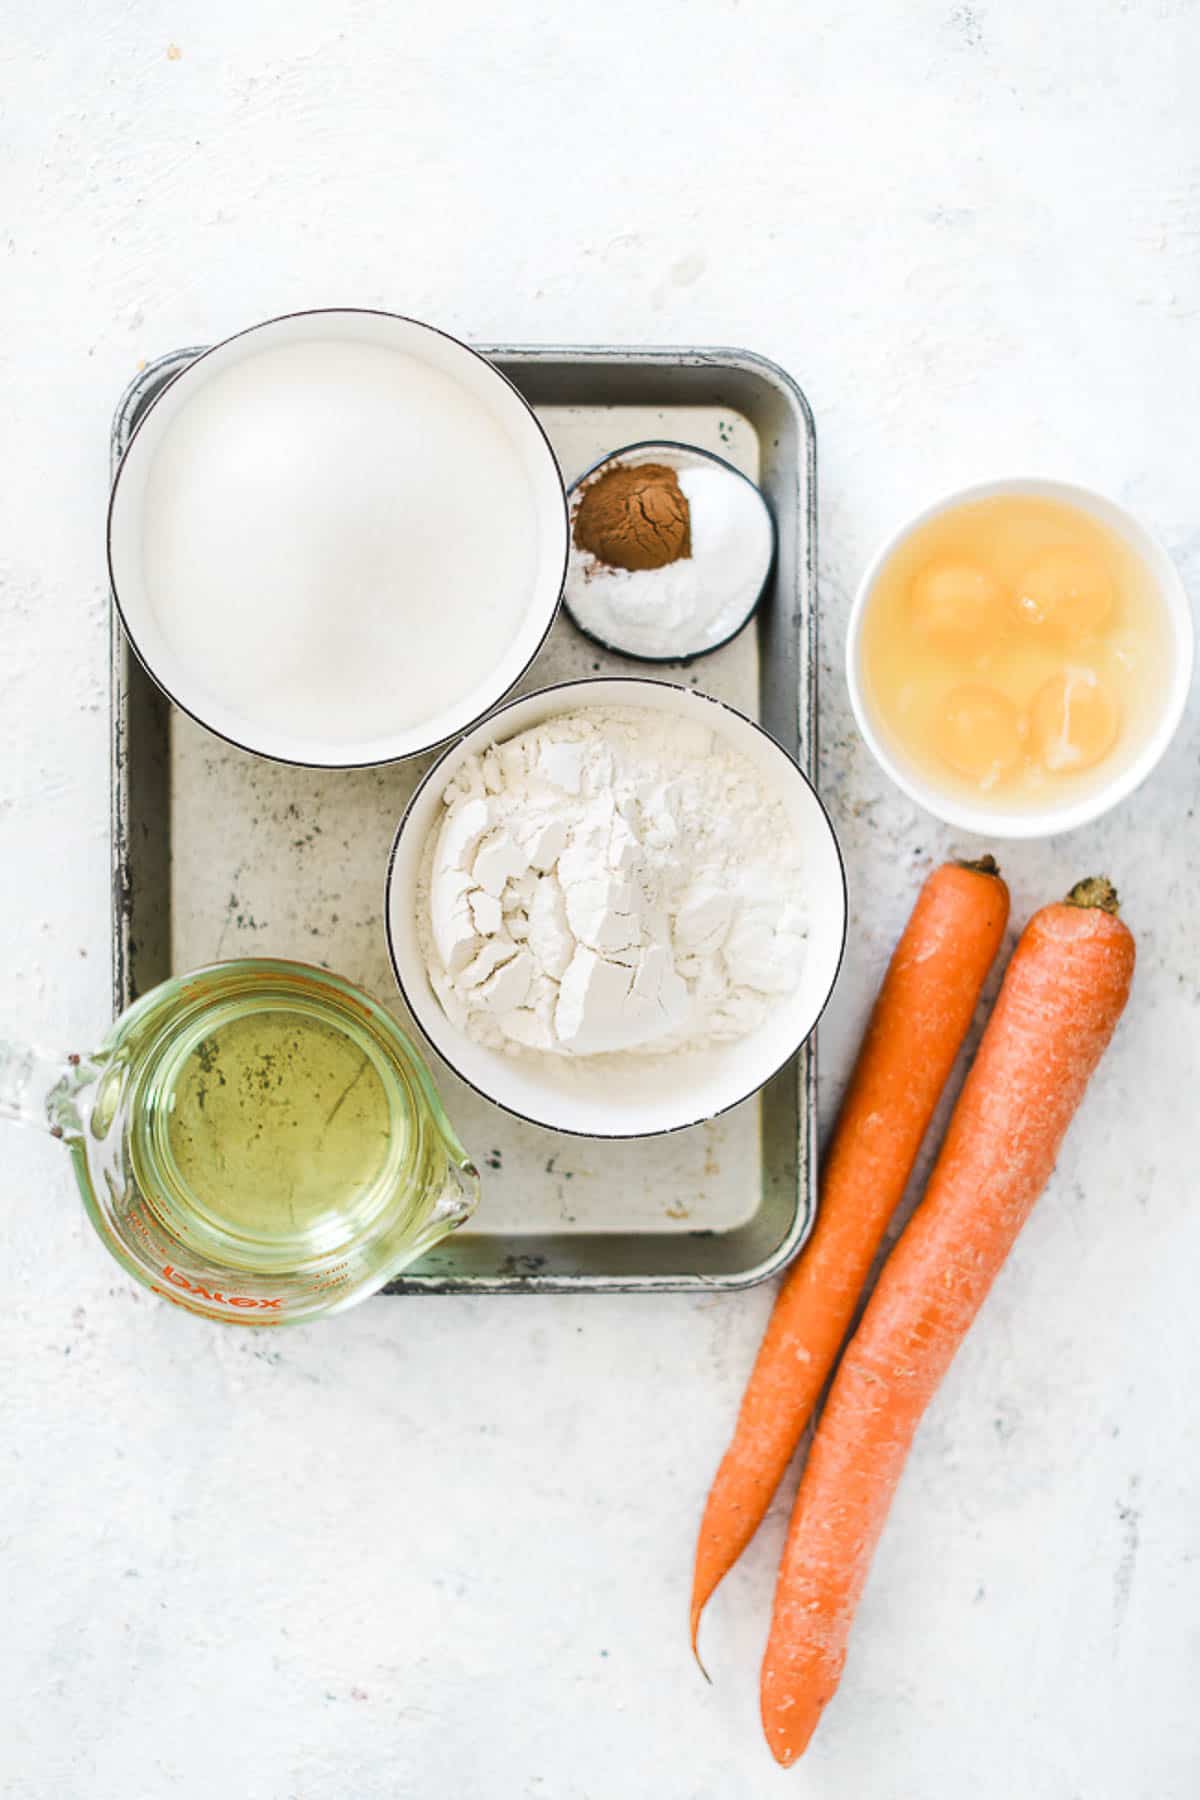 Ingredients needed to make carrot cake.